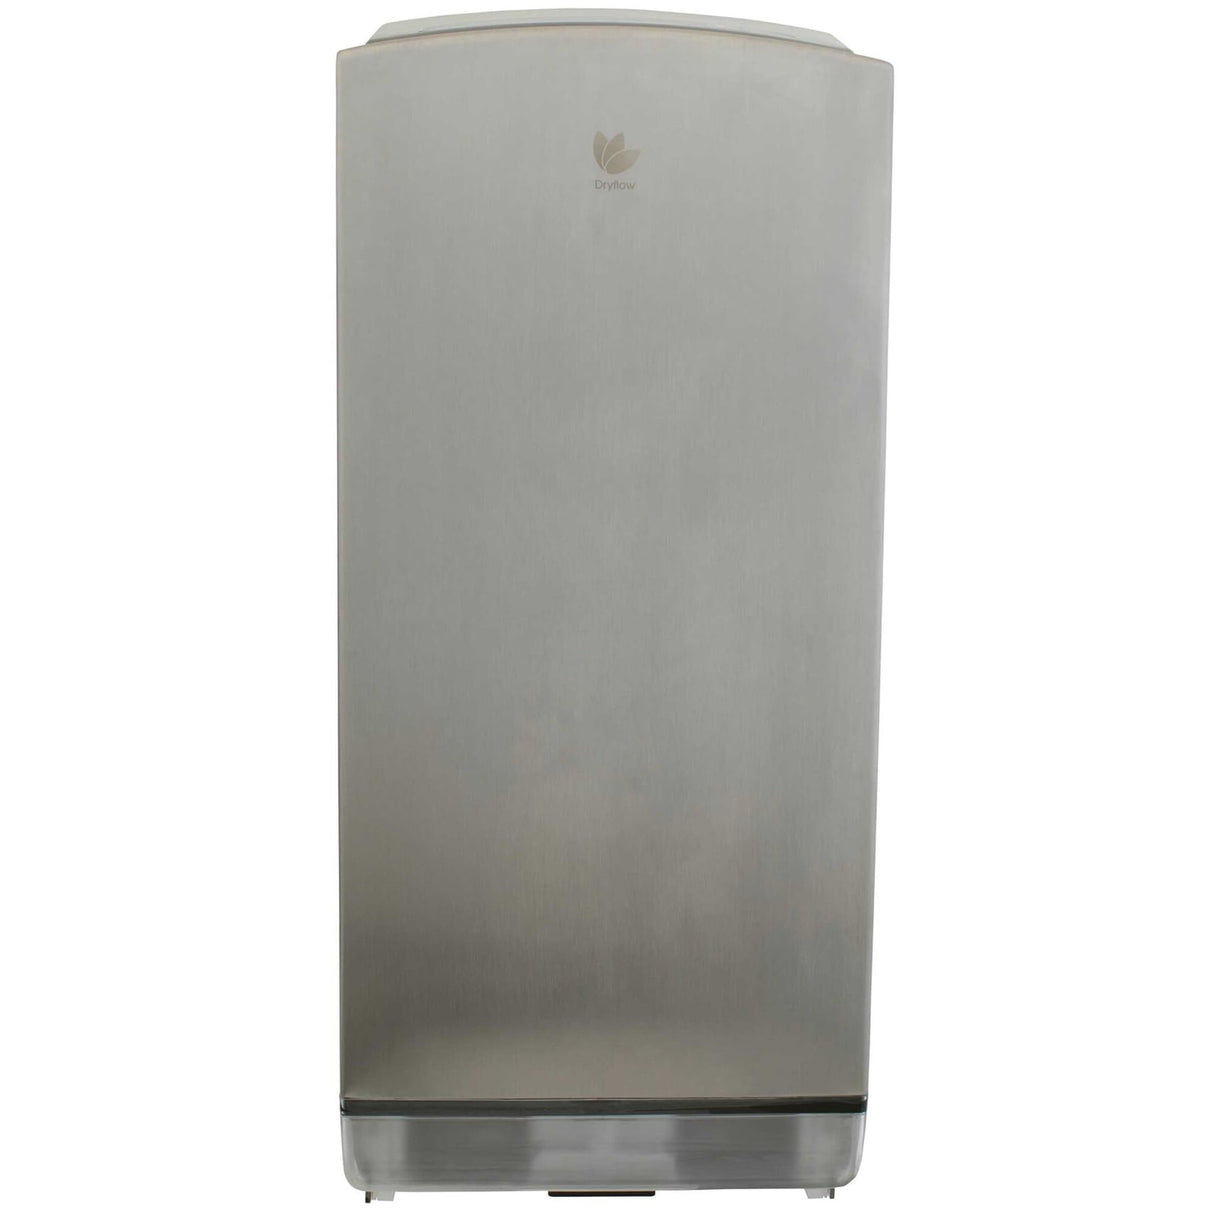 SteelForce Stainless Steel Hand Dryer with HEPA filter